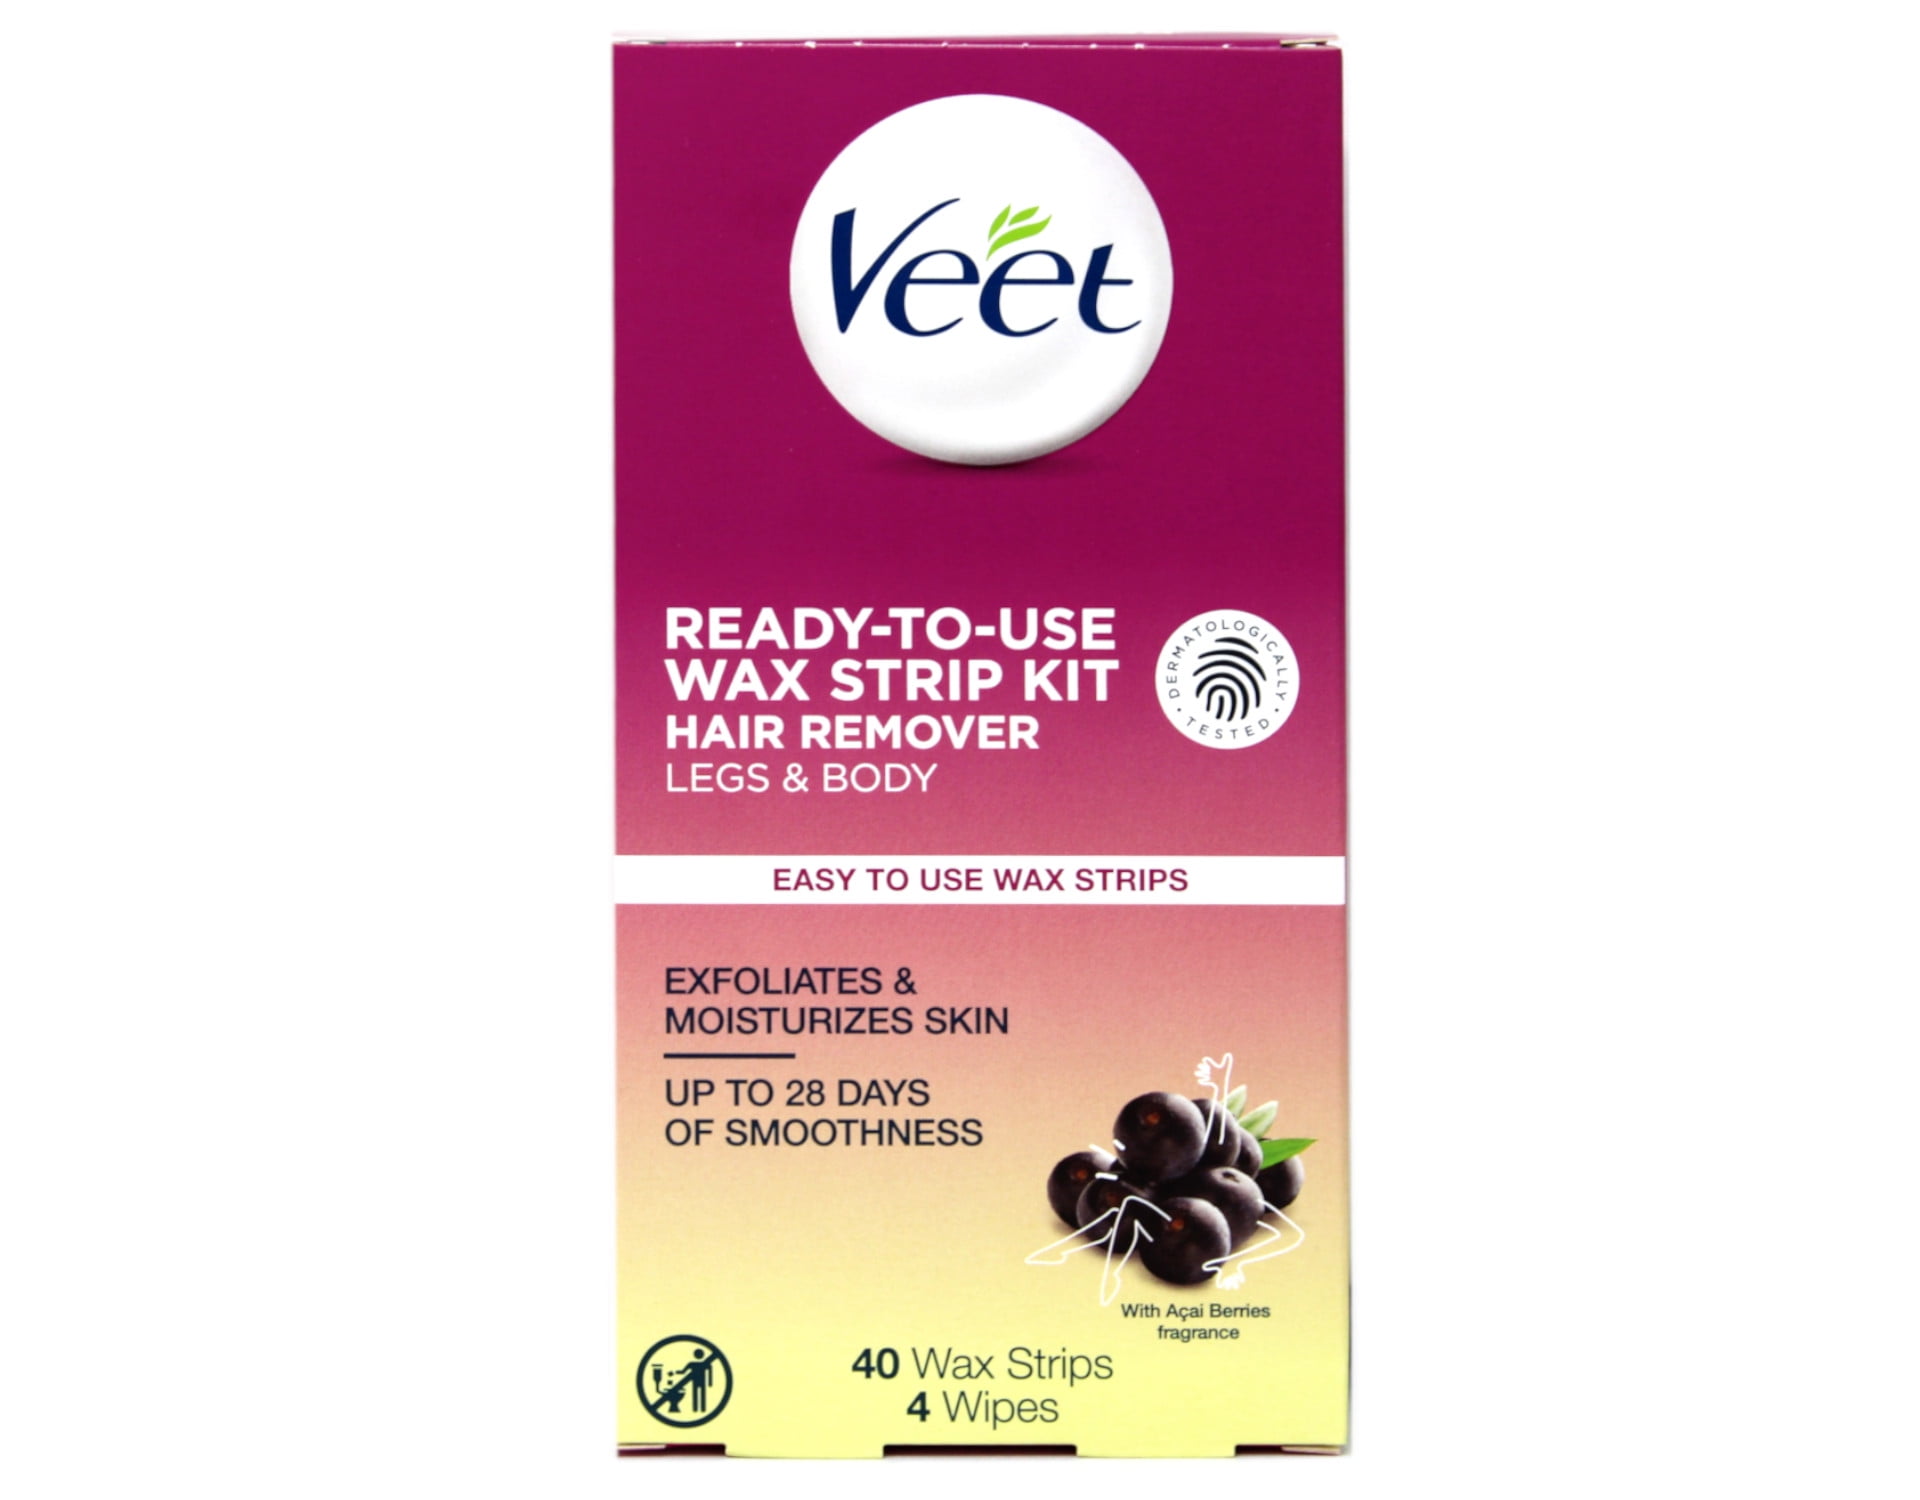 Veet Ready to Use Wax Strip Kit Hair Remover Legs & Body 40 Strips -  